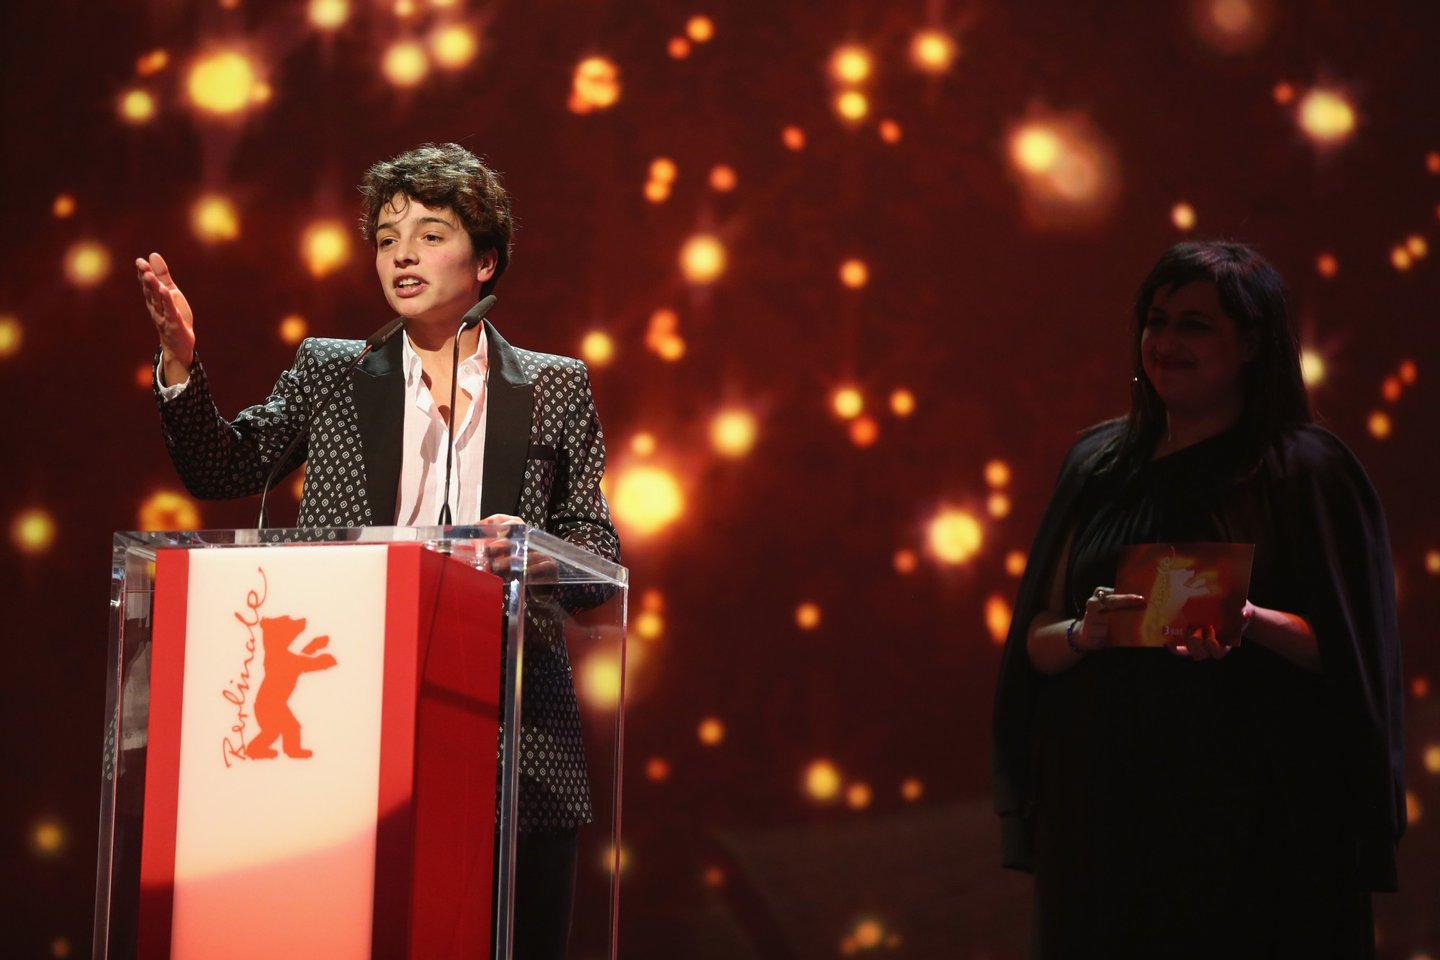 BERLIN, GERMANY - FEBRUARY 20: Director Leonor Teles winner of the Golden Bear for Best Short Film for 'Balada de um BatrÃ¡quio' speaks on stage during the closing ceremony of the 66th Berlinale International Film Festival on February 20, 2016 in Berlin, Germany. (Photo by Sean Gallup/Getty Images)